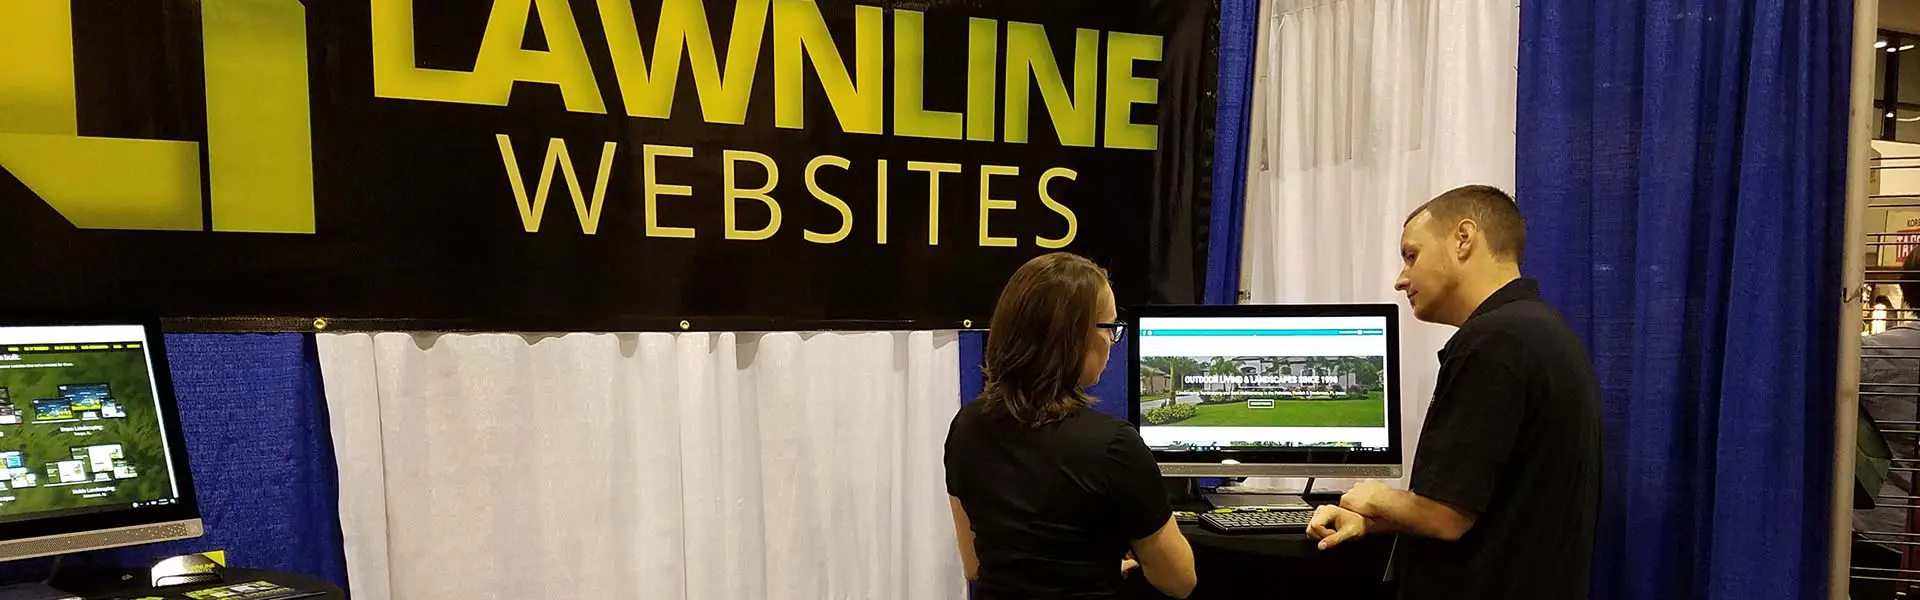 Lawnline Marketing booth at FNGLA Landscape Show in Orlando